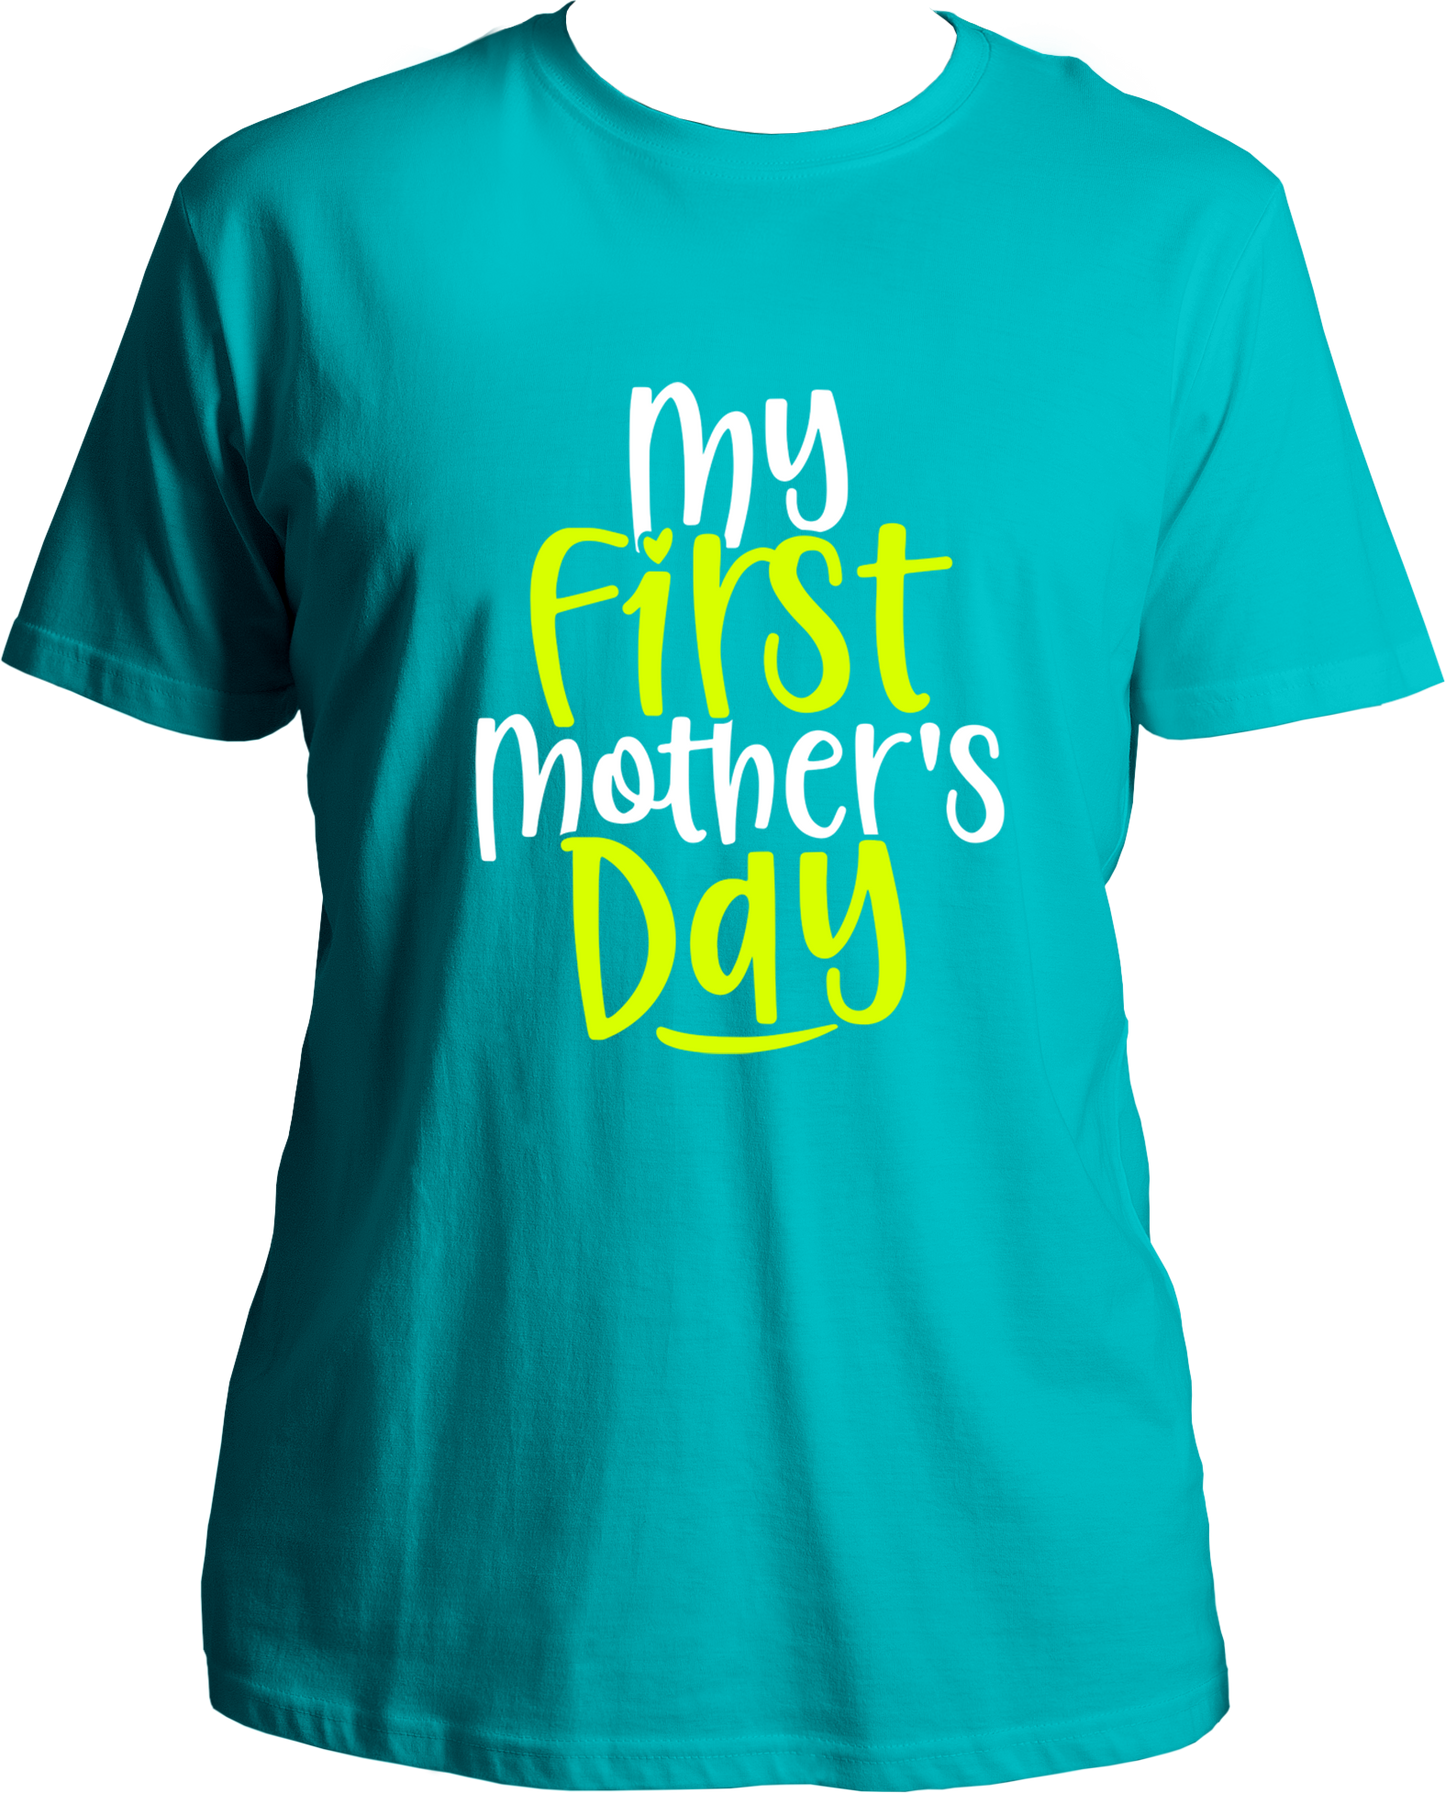 Celebrate your first Mother's Day with a special gift! Make the day special with one of our unique t-shirts, designed specifically for moms celebrating their inaugural Mother's Day. Give a personalized touch and make your first Mother's Day a memorable one. Each t-shirt is crafted with comfort and quality in mind, featuring soft, breathable materials for maximum comfort. These t-shirts are sure to make the perfect statement on the big day.